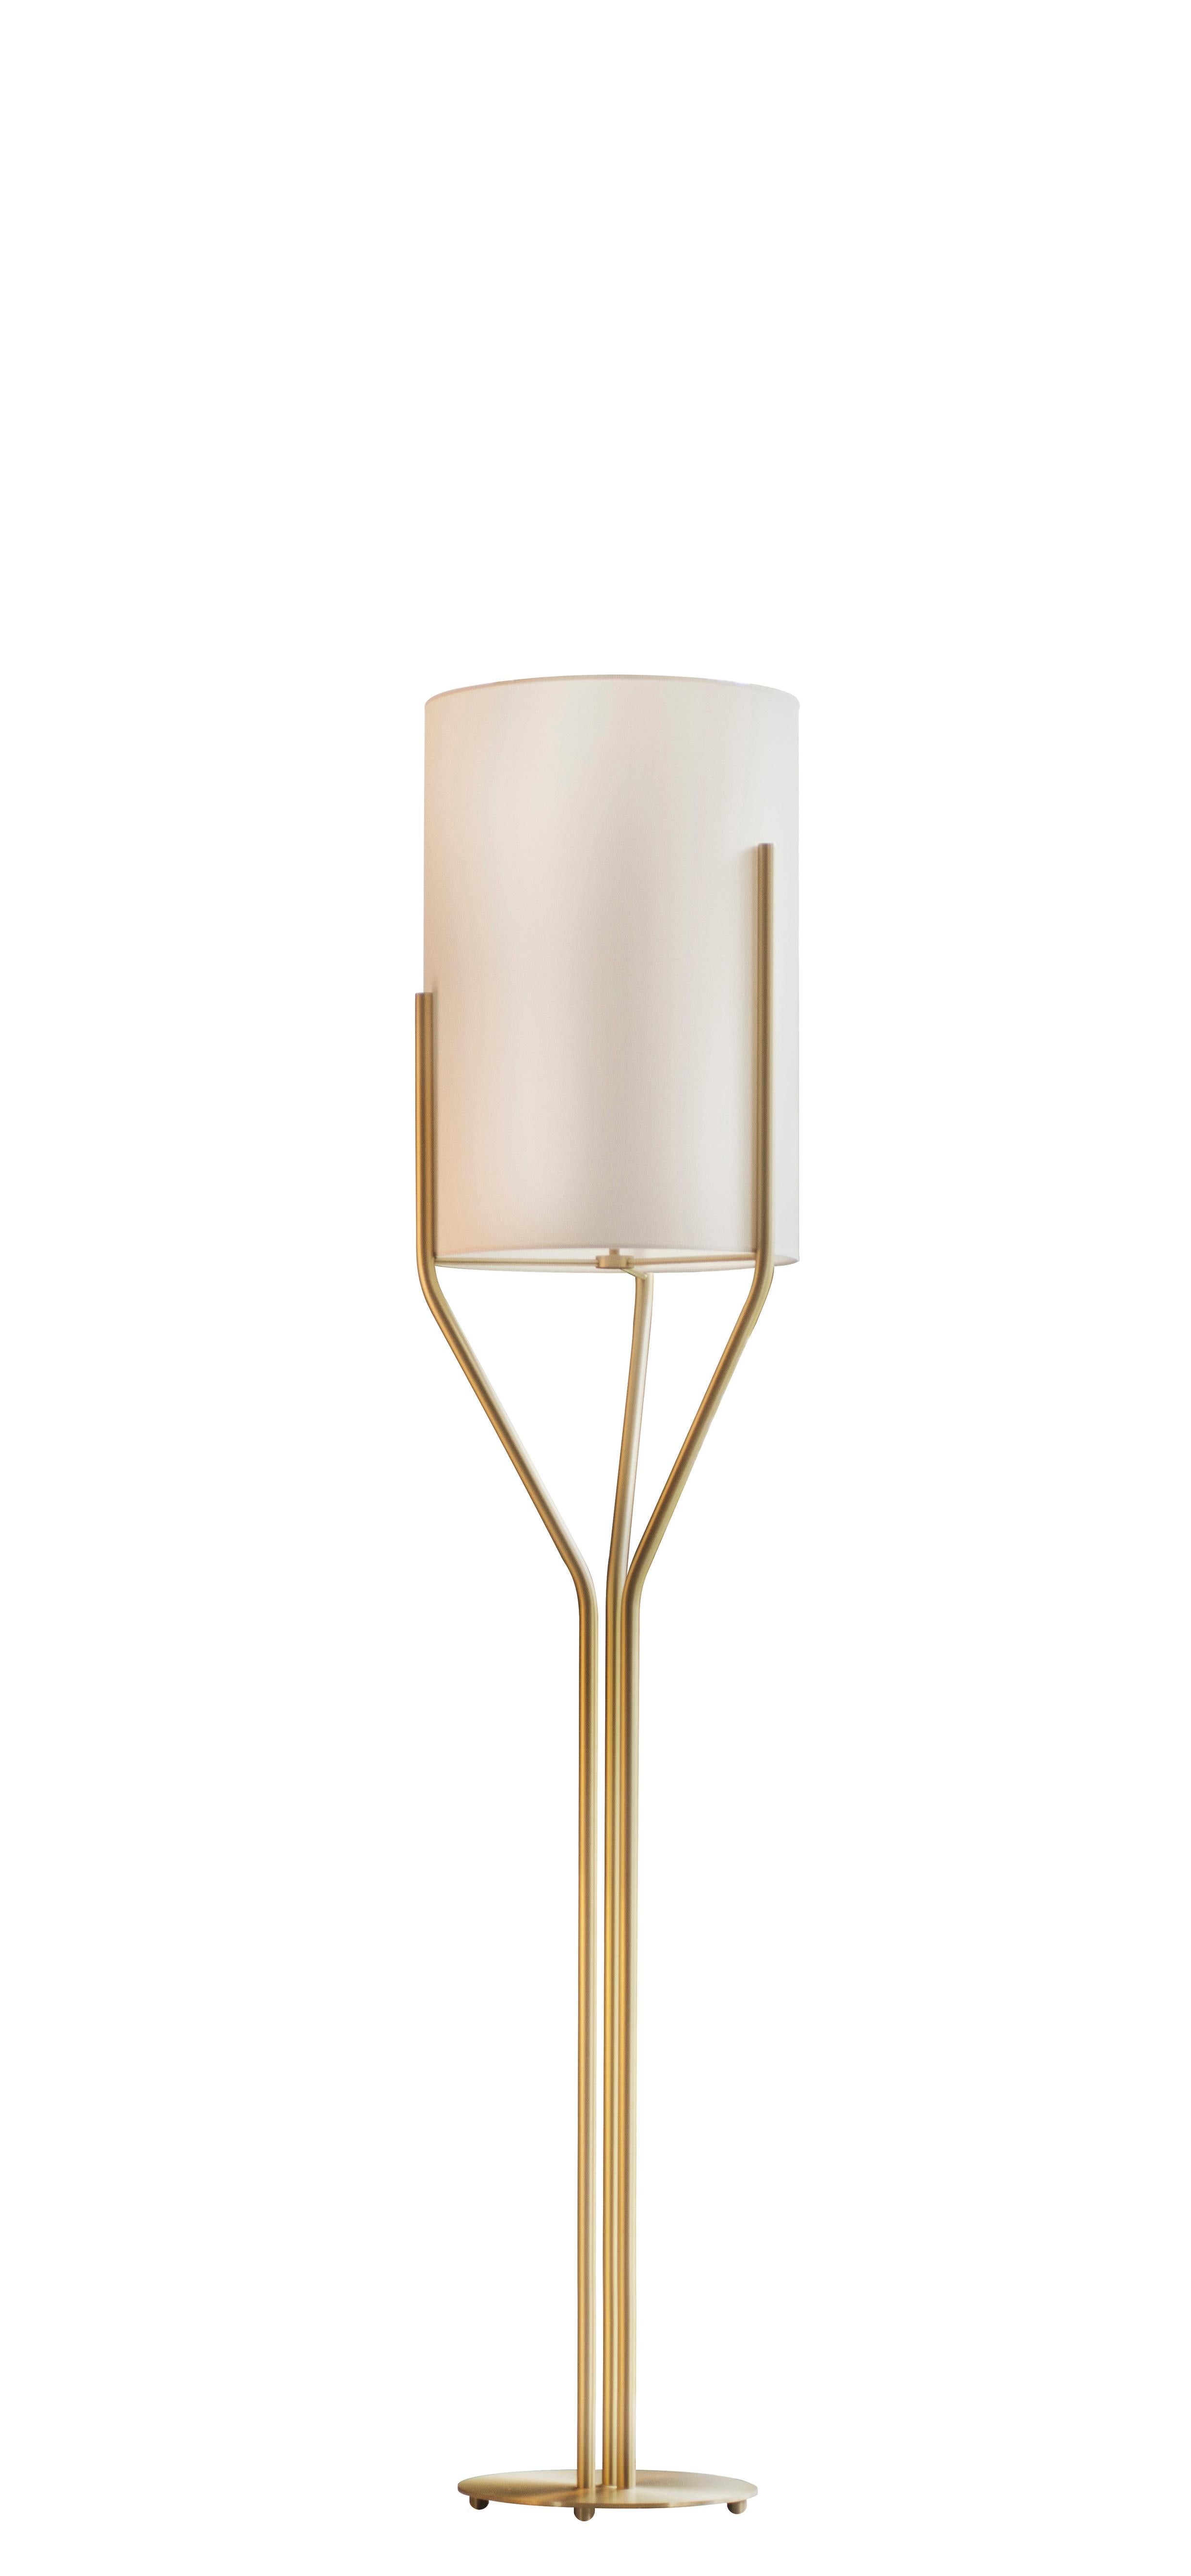 Arborescence S satin brass floor lamp by Hervé Langlais
Dimensions: D33 X H150 cm
Materials: Solid brass, lampshade drop paper® M1, black textile cable (2m).
Others finishes and dimensions are available.

All our lamps can be wired according to